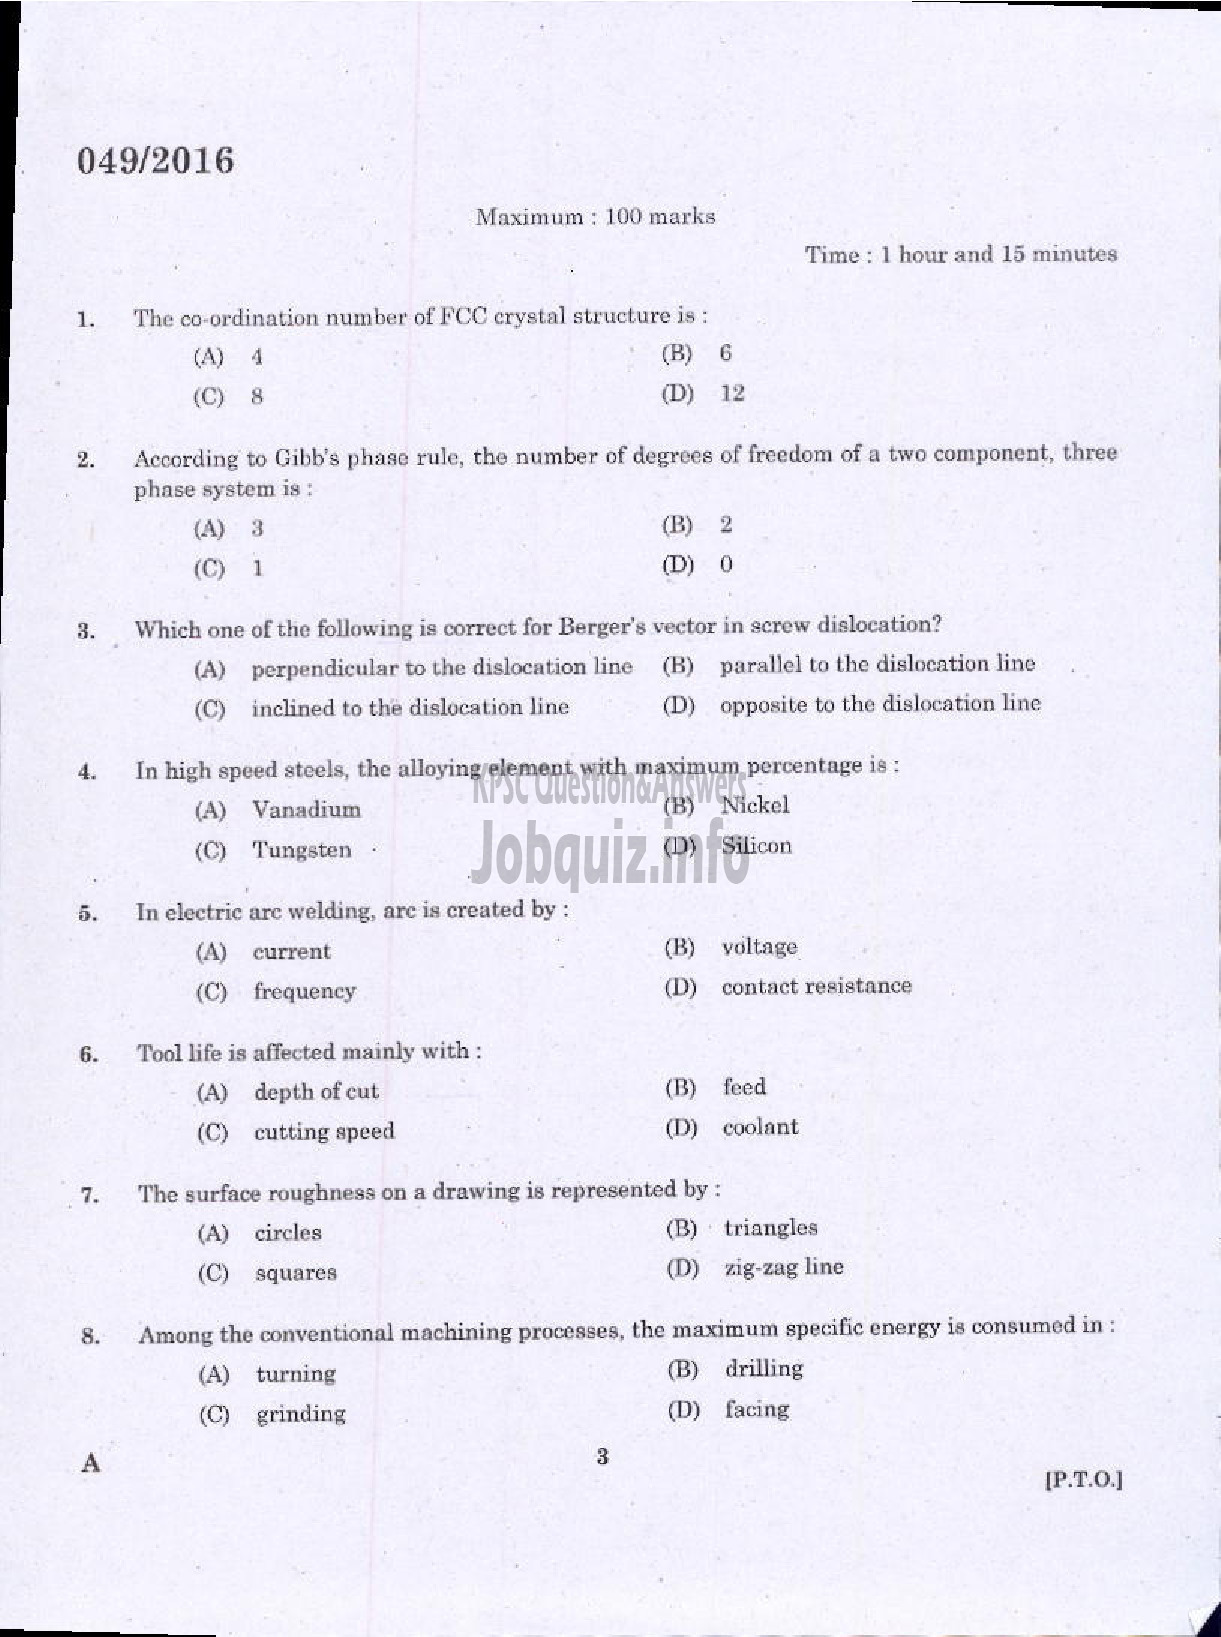 Kerala PSC Question Paper - WORKS MANAGER STATE WATER TRANSPORT-1